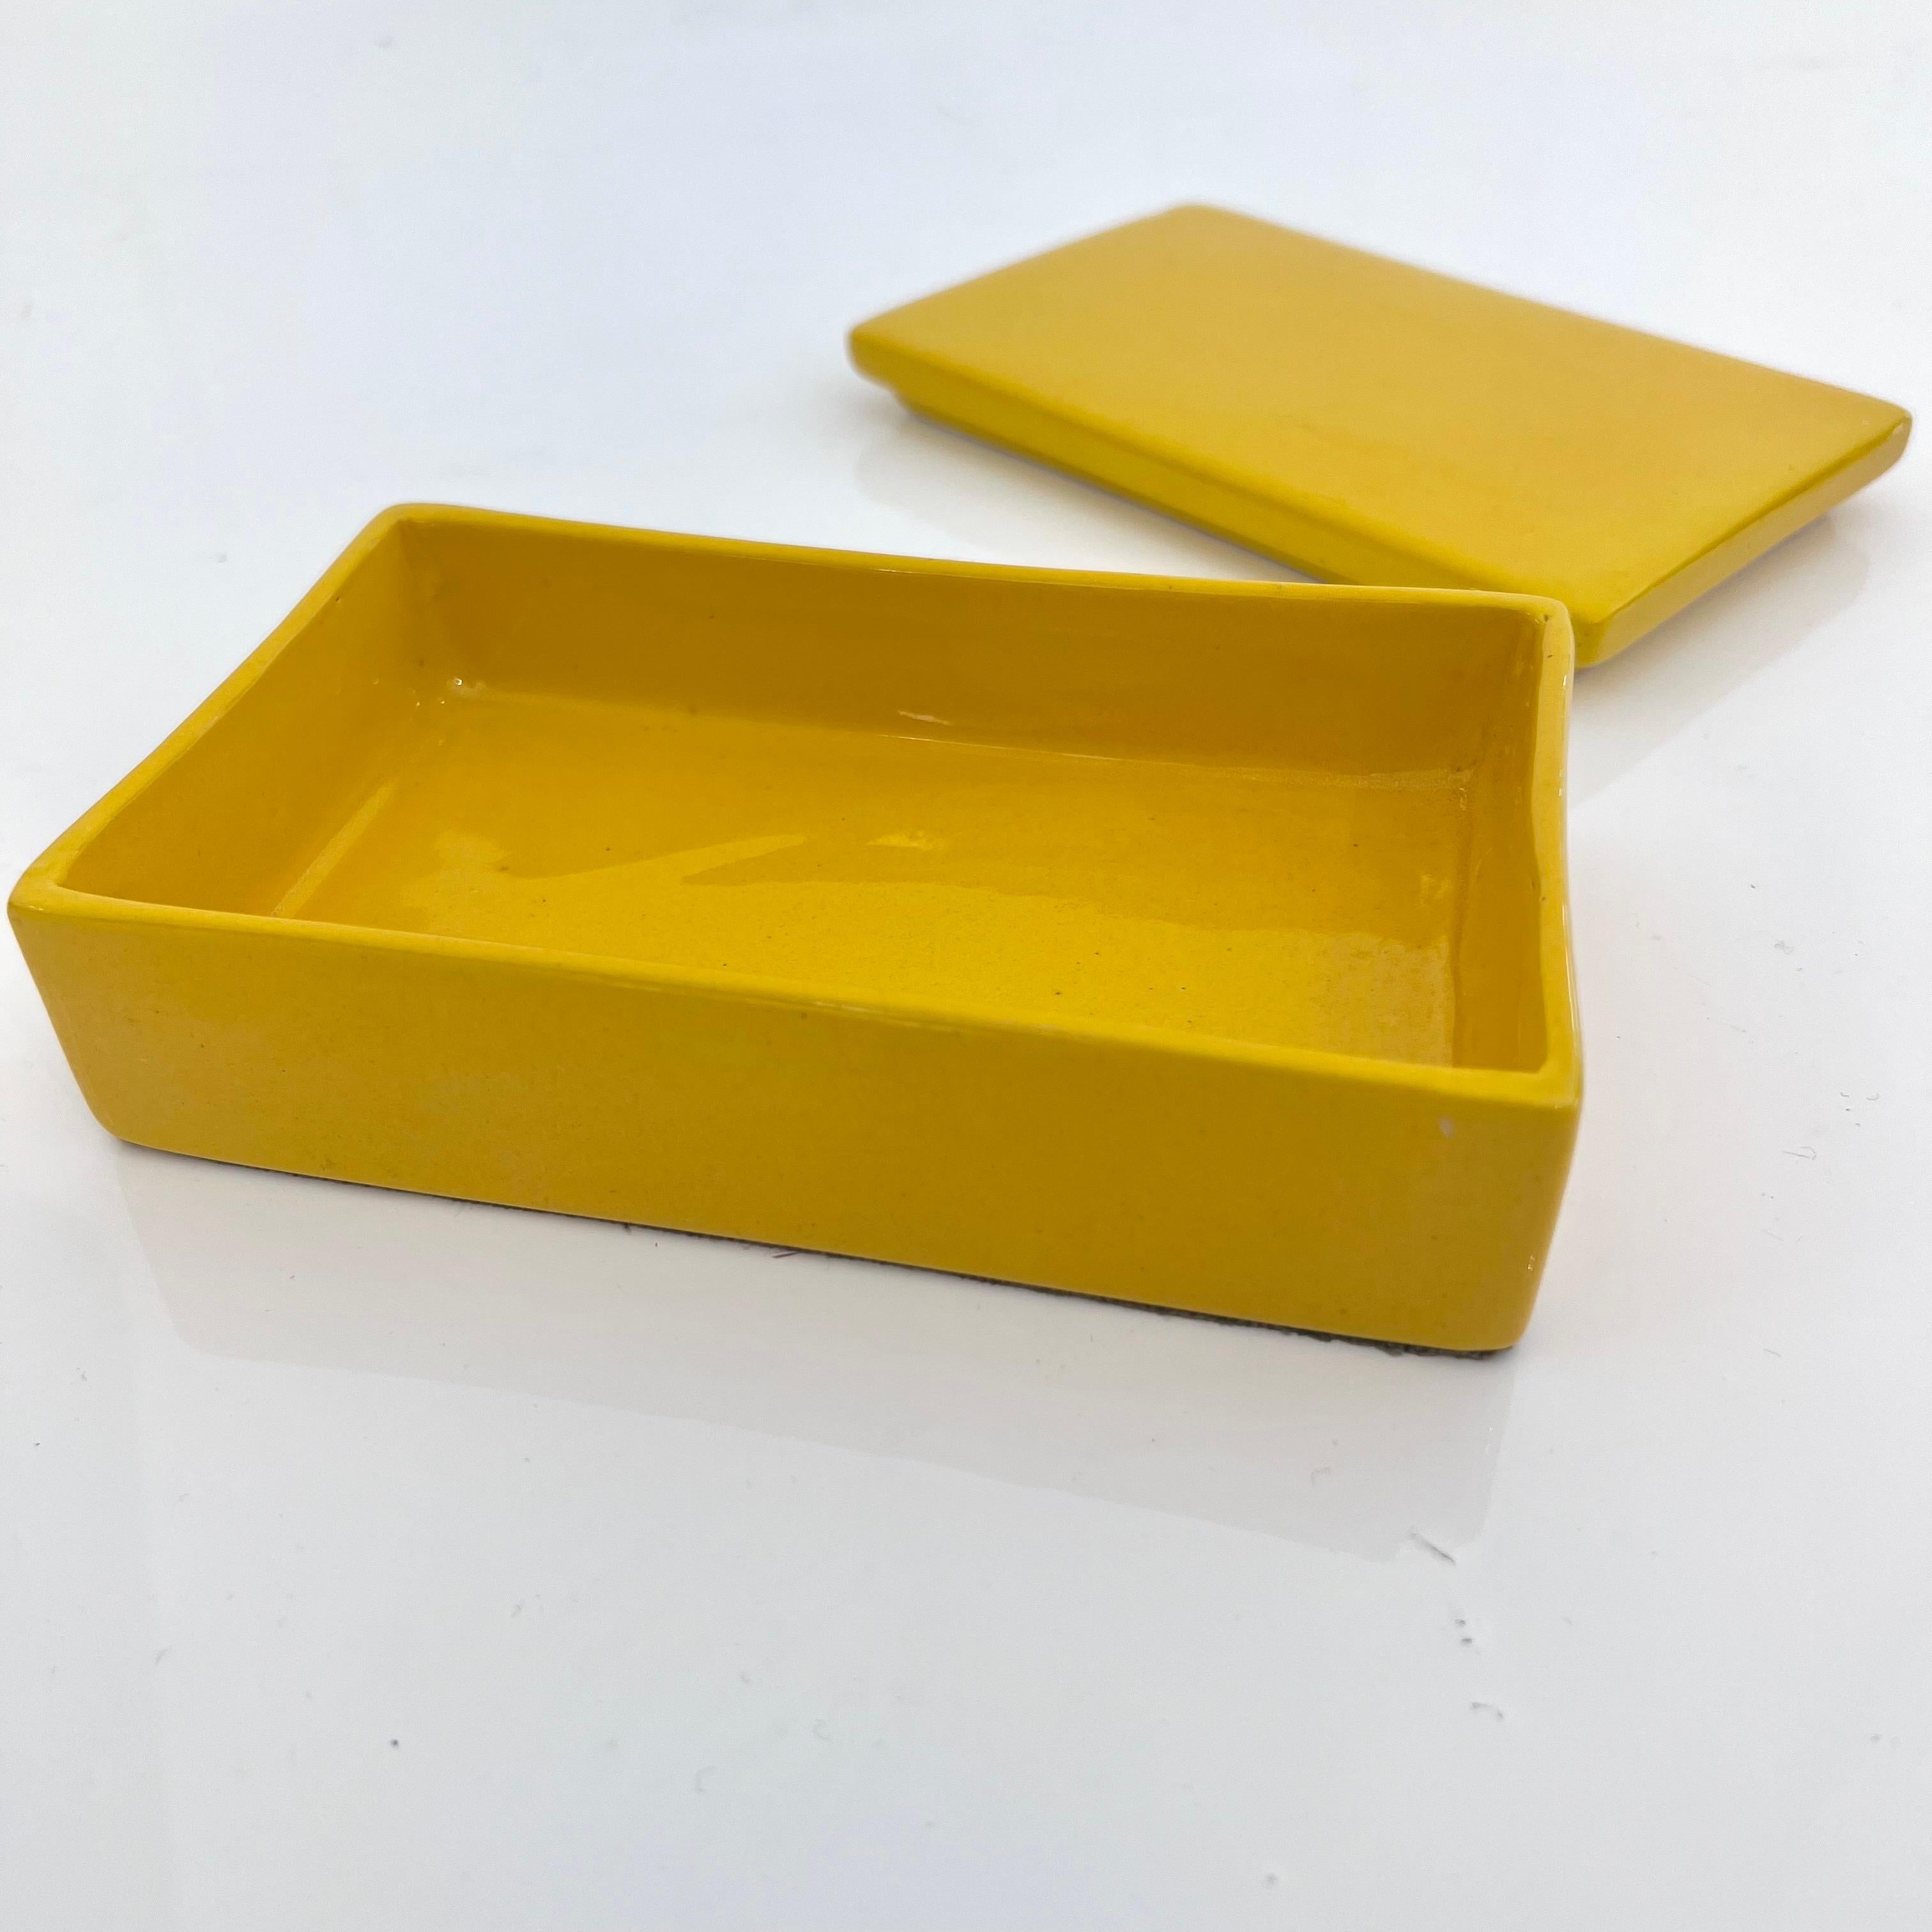 Glaze ceramic box made in Italy by Raymor, circa 1960s. Stunning bright yellow glaze covers the entire exterior of the box as well as the inside of the box. Great vintage condition. Fun stash box and tabletop object.